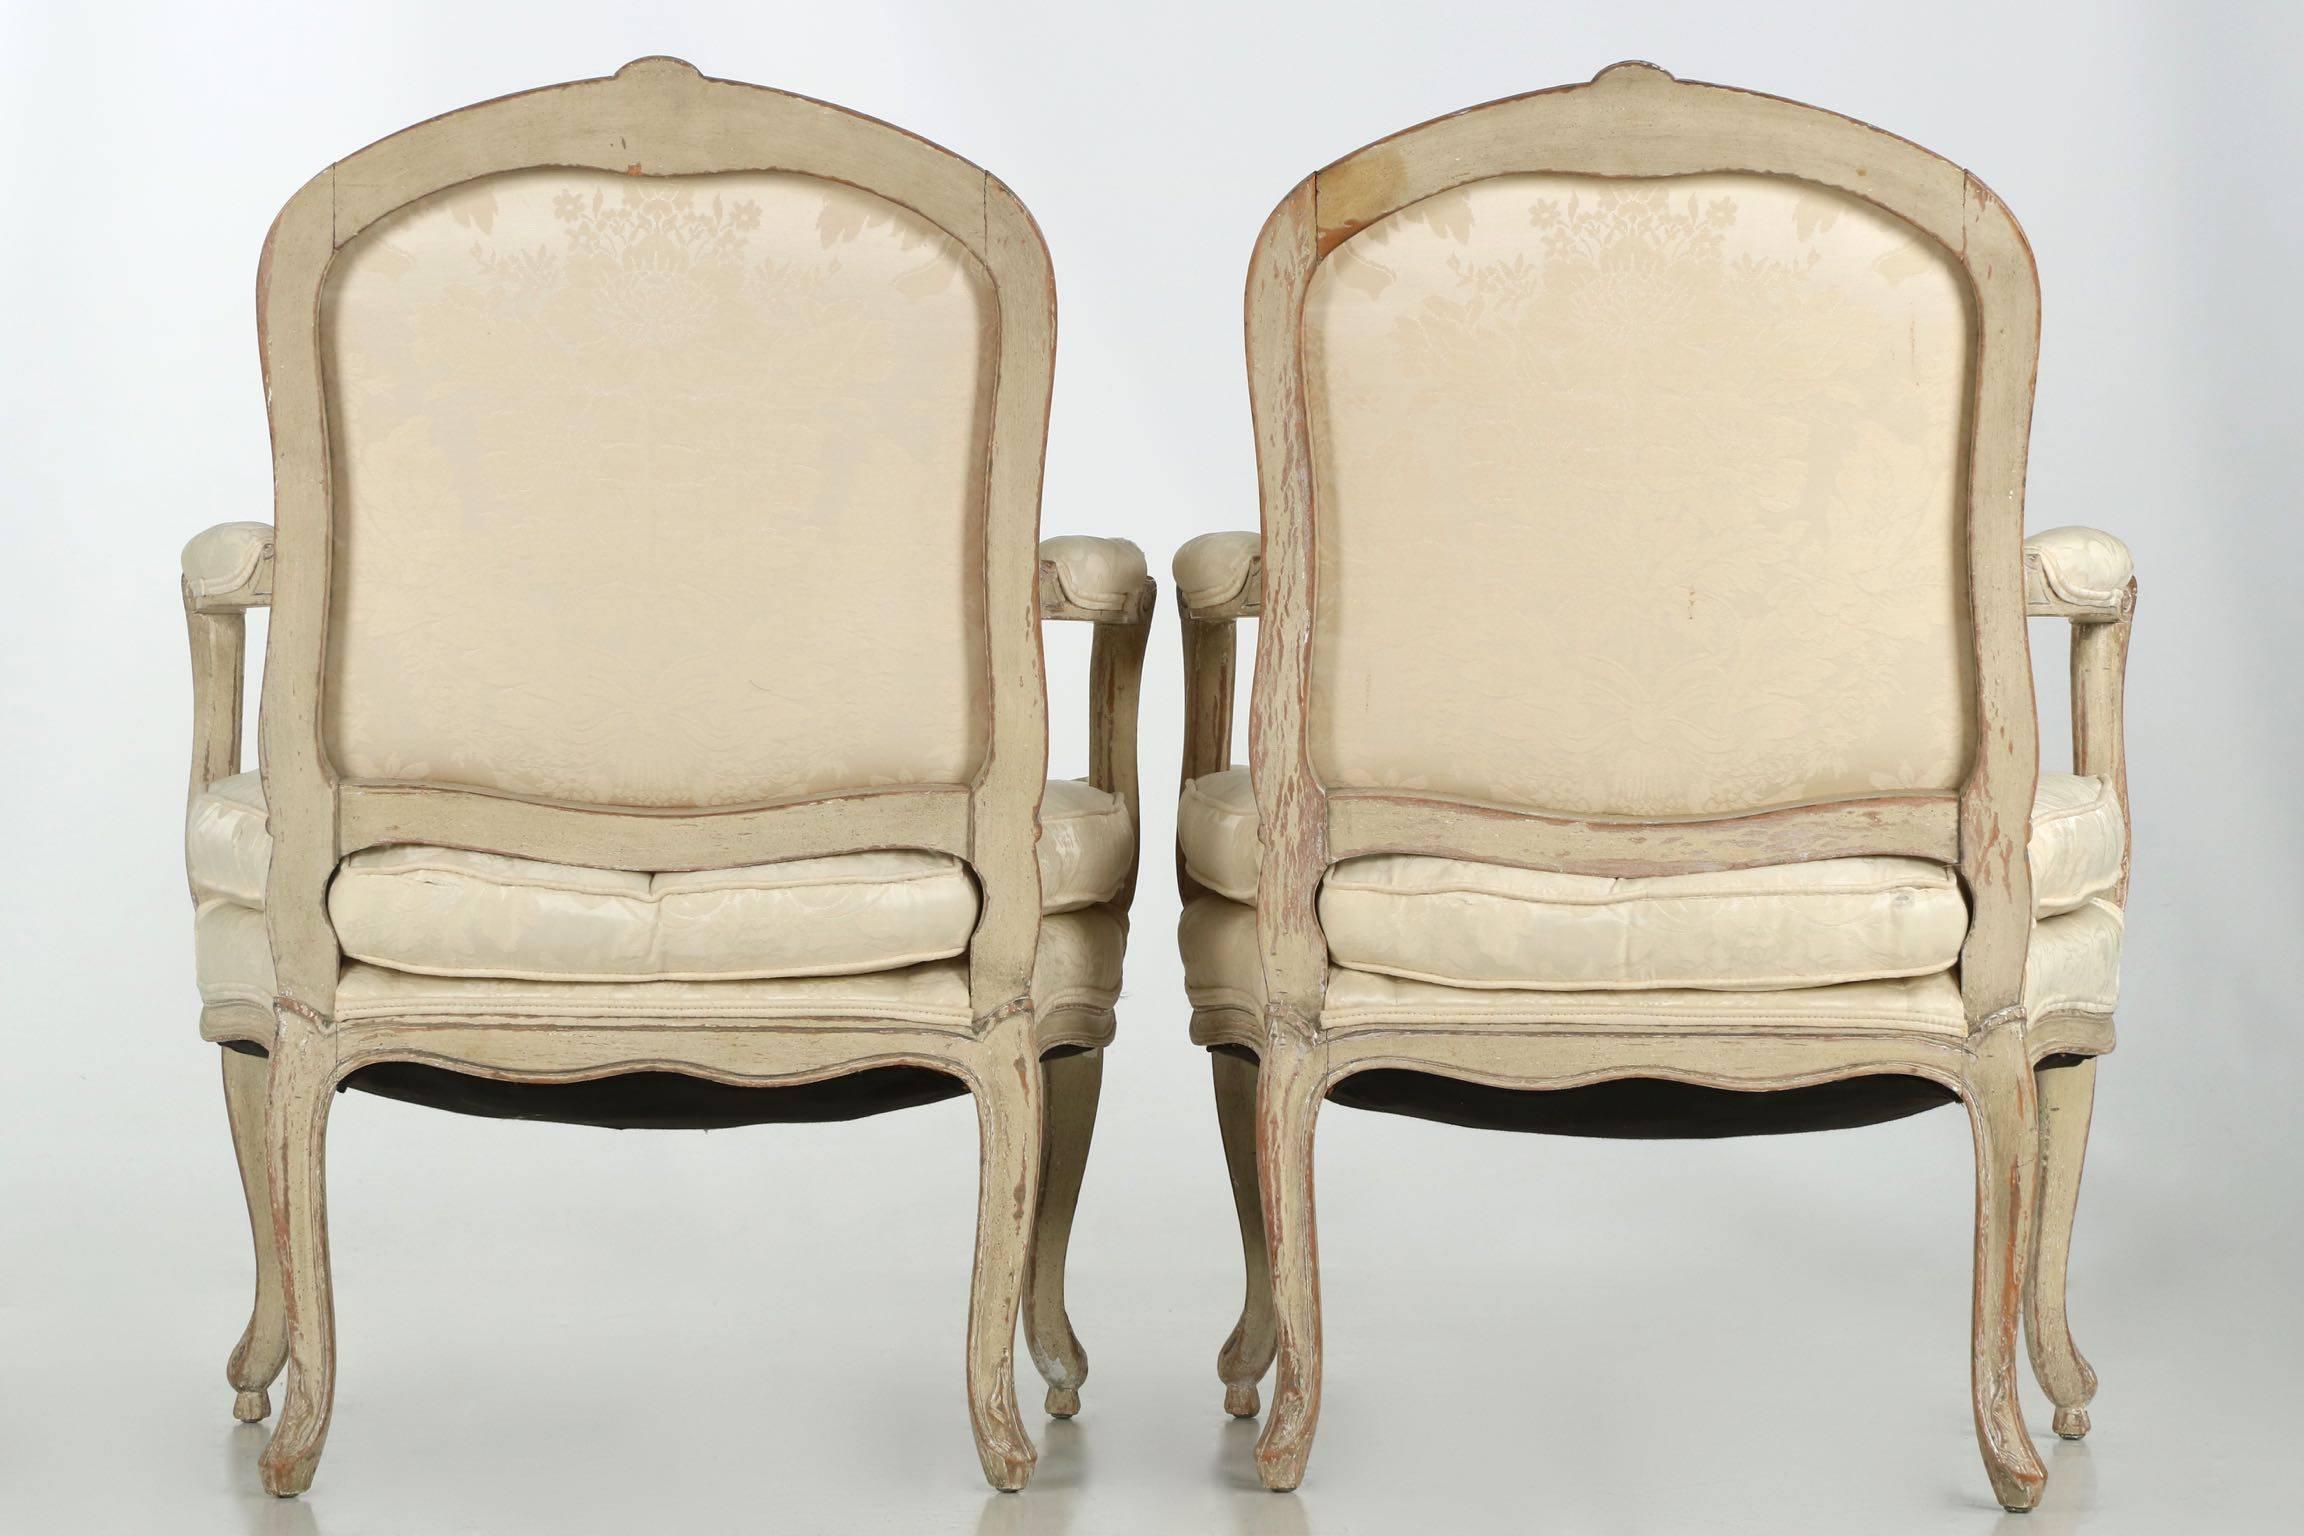 European Vintage Pair of French Louis XV Style Distressed White Painted Armchairs